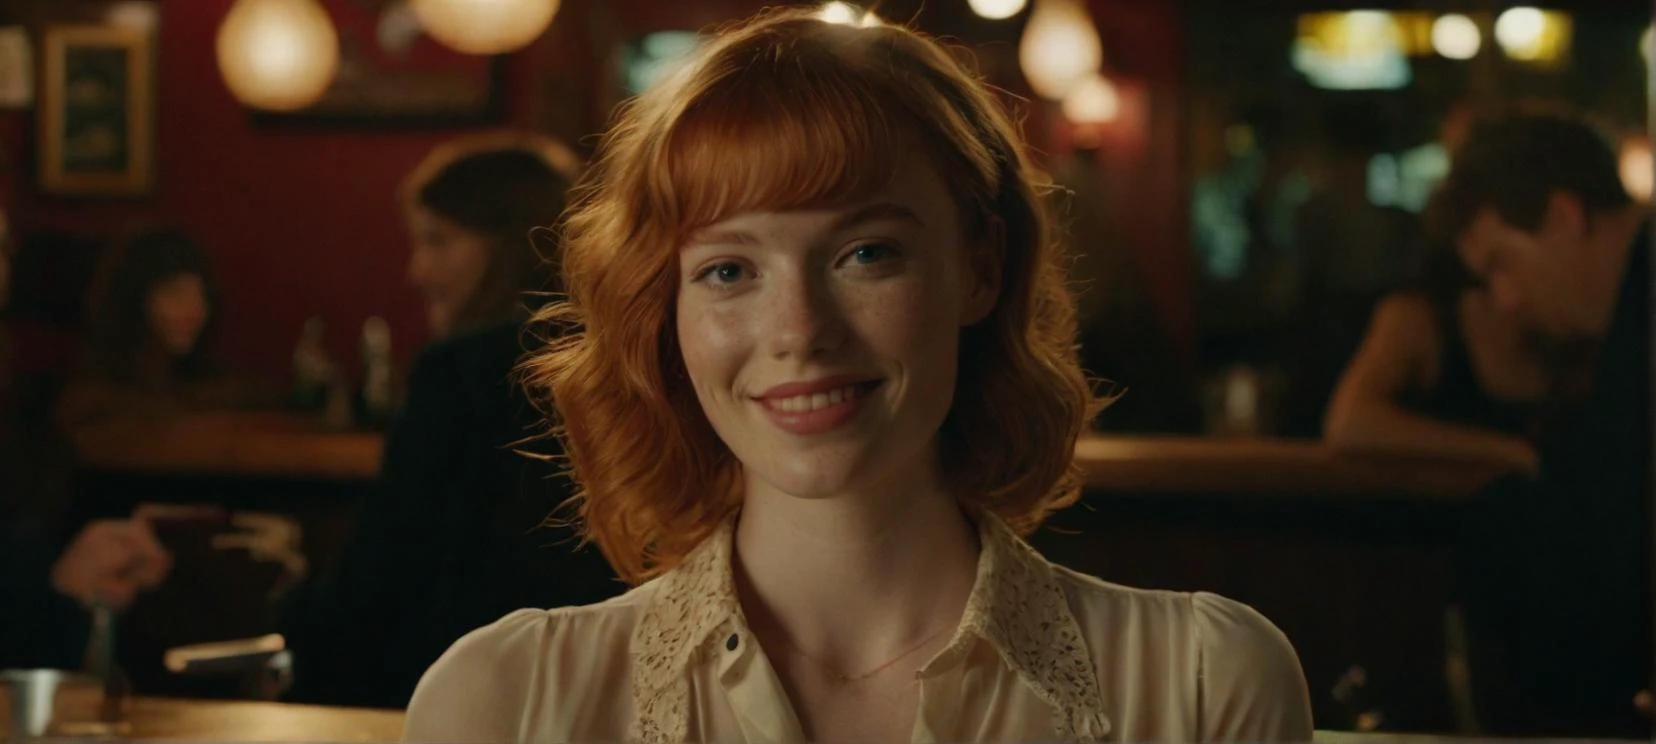 A cinematic film still of a 

a close up photo of a 20 year old french woman in a blouse at a bar, seductive smile, ginger hair, cinematic light, film still,